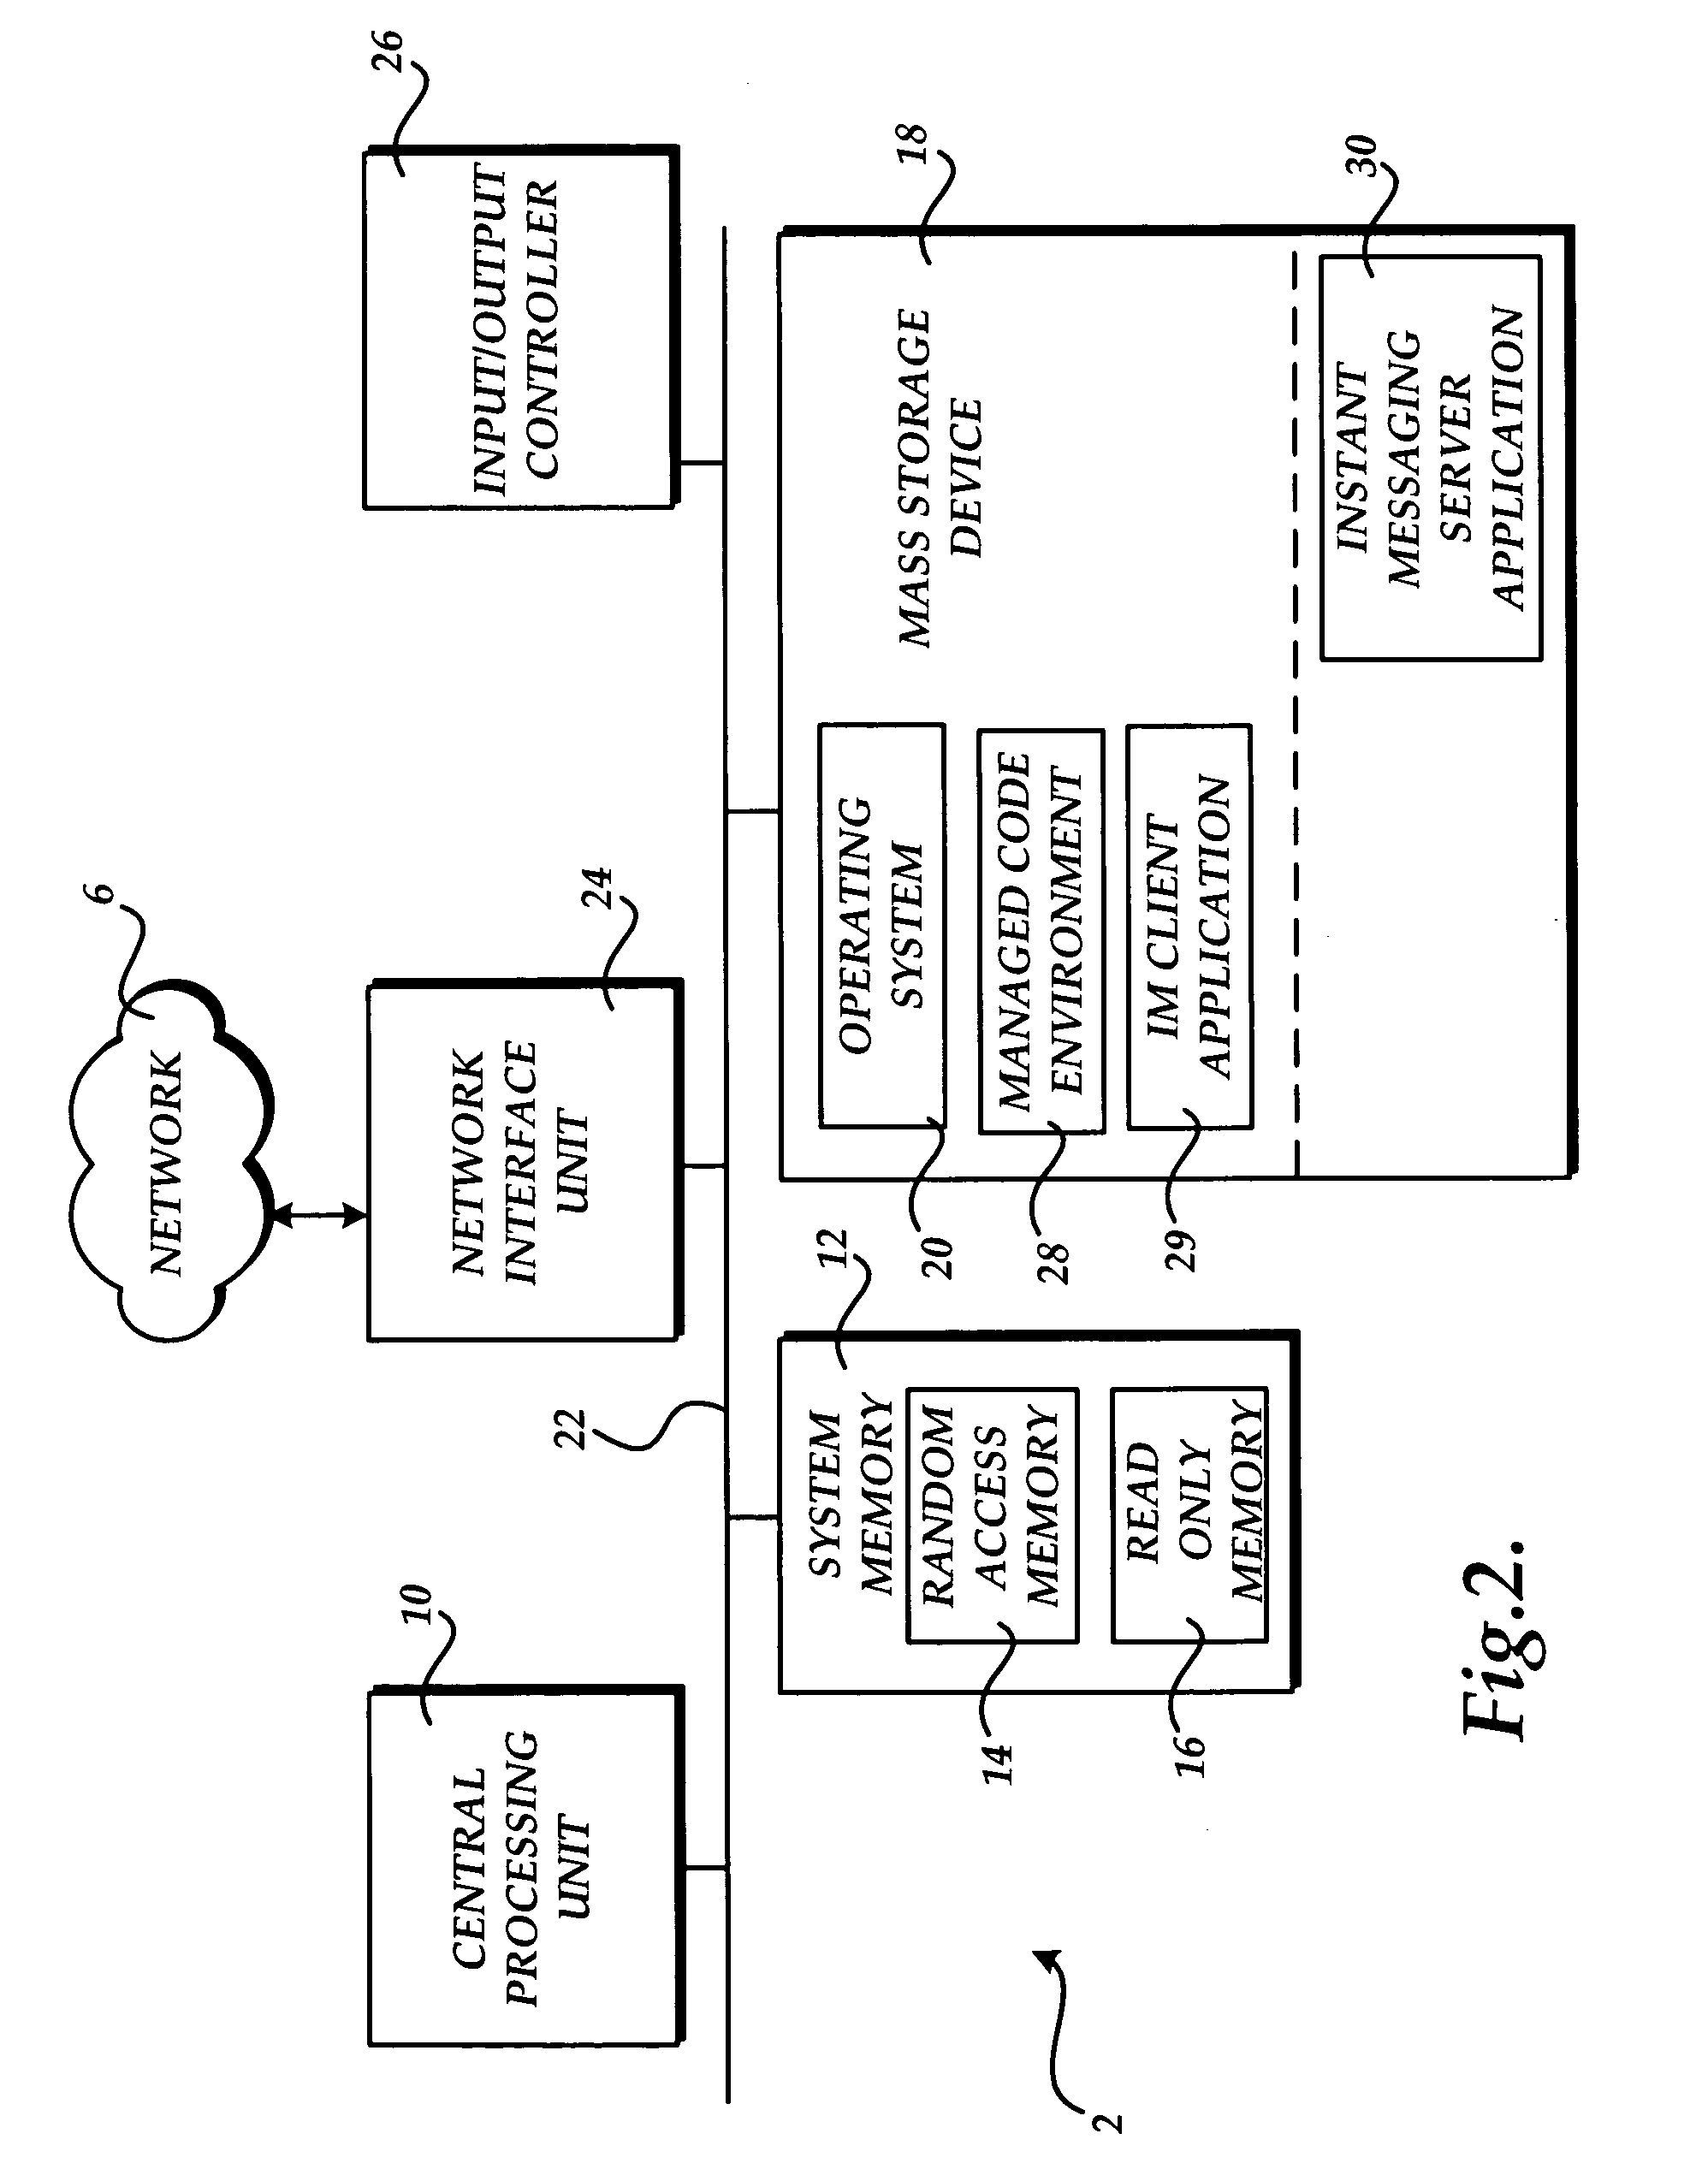 Instant messaging communications channel for transporting data between objects executing within a managed code environment